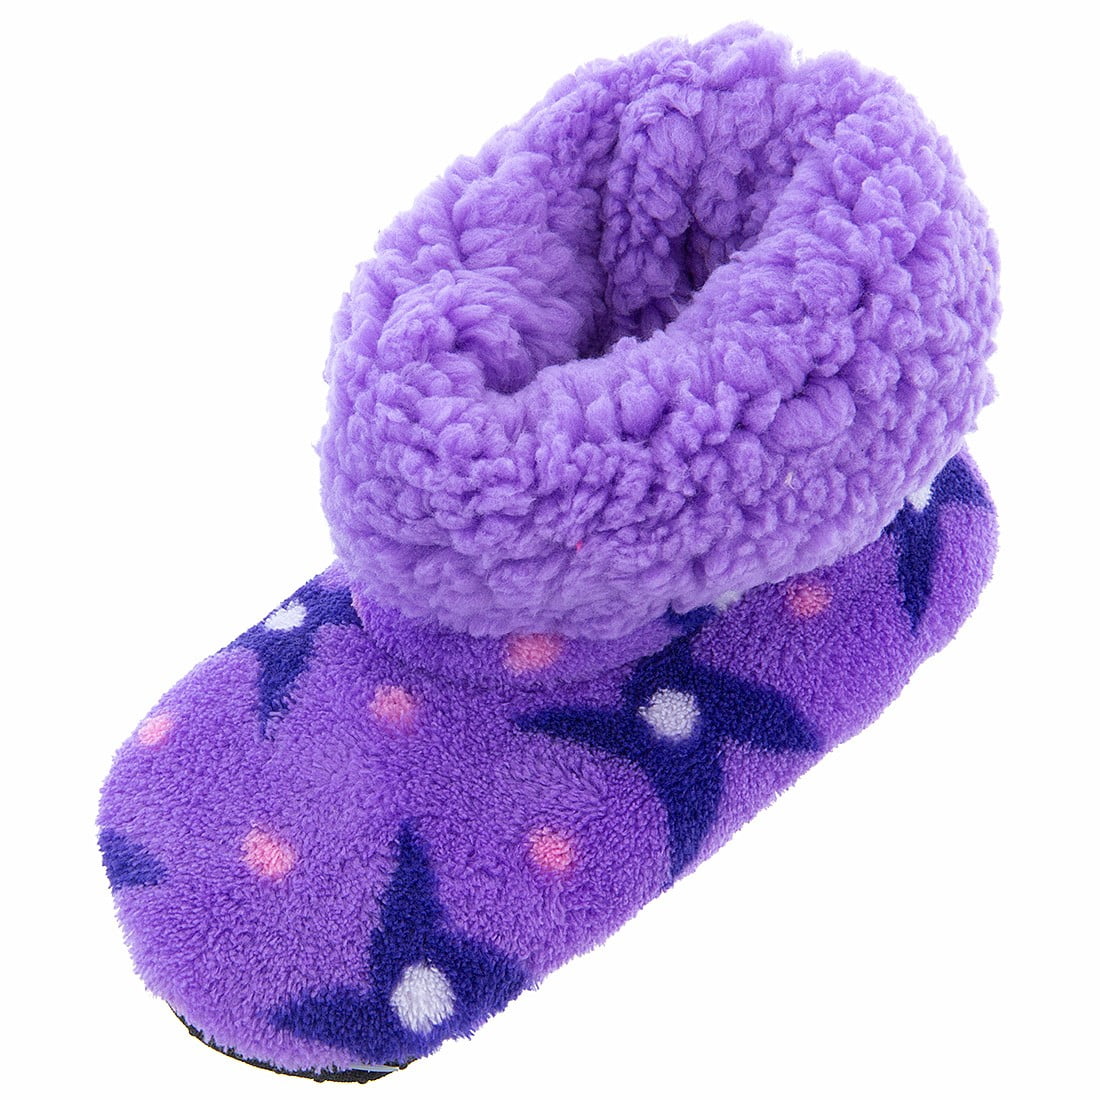 childrens slippers size 2